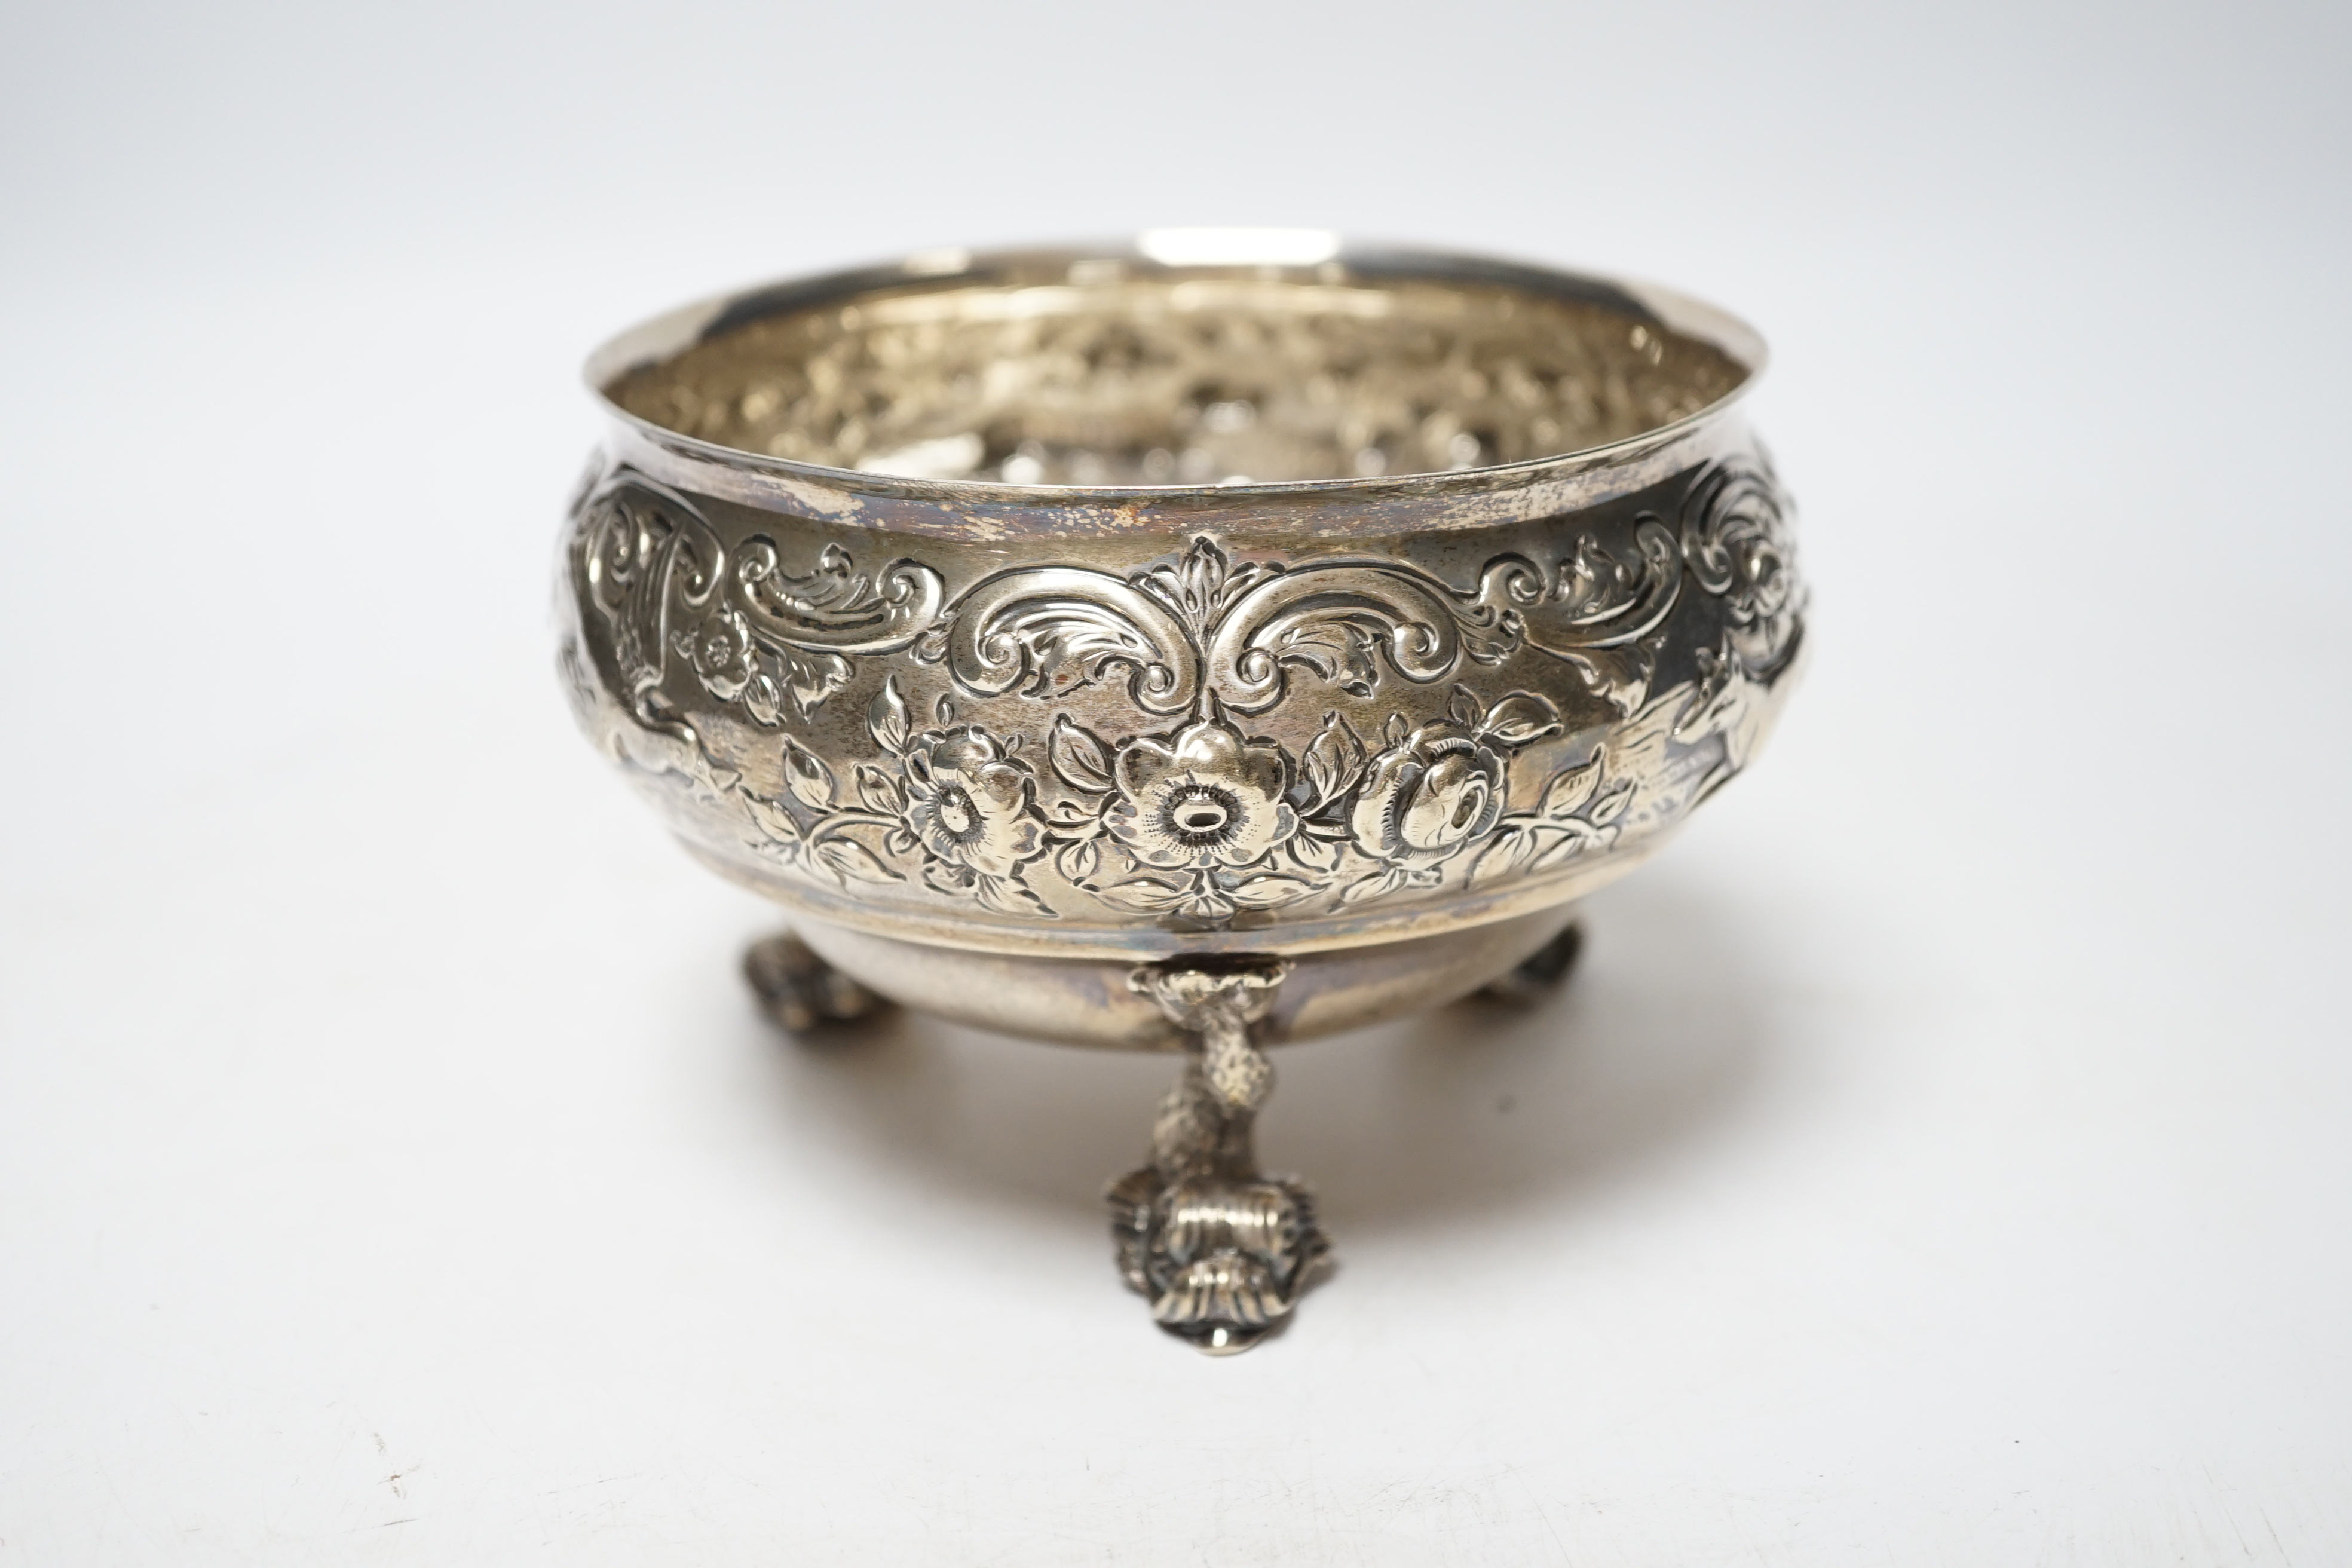 An Edwardian embossed silver bowl, on three dolphin supports, Wakely & Wheeler, London, 1905, diameter 11.6cm, 11.4oz.